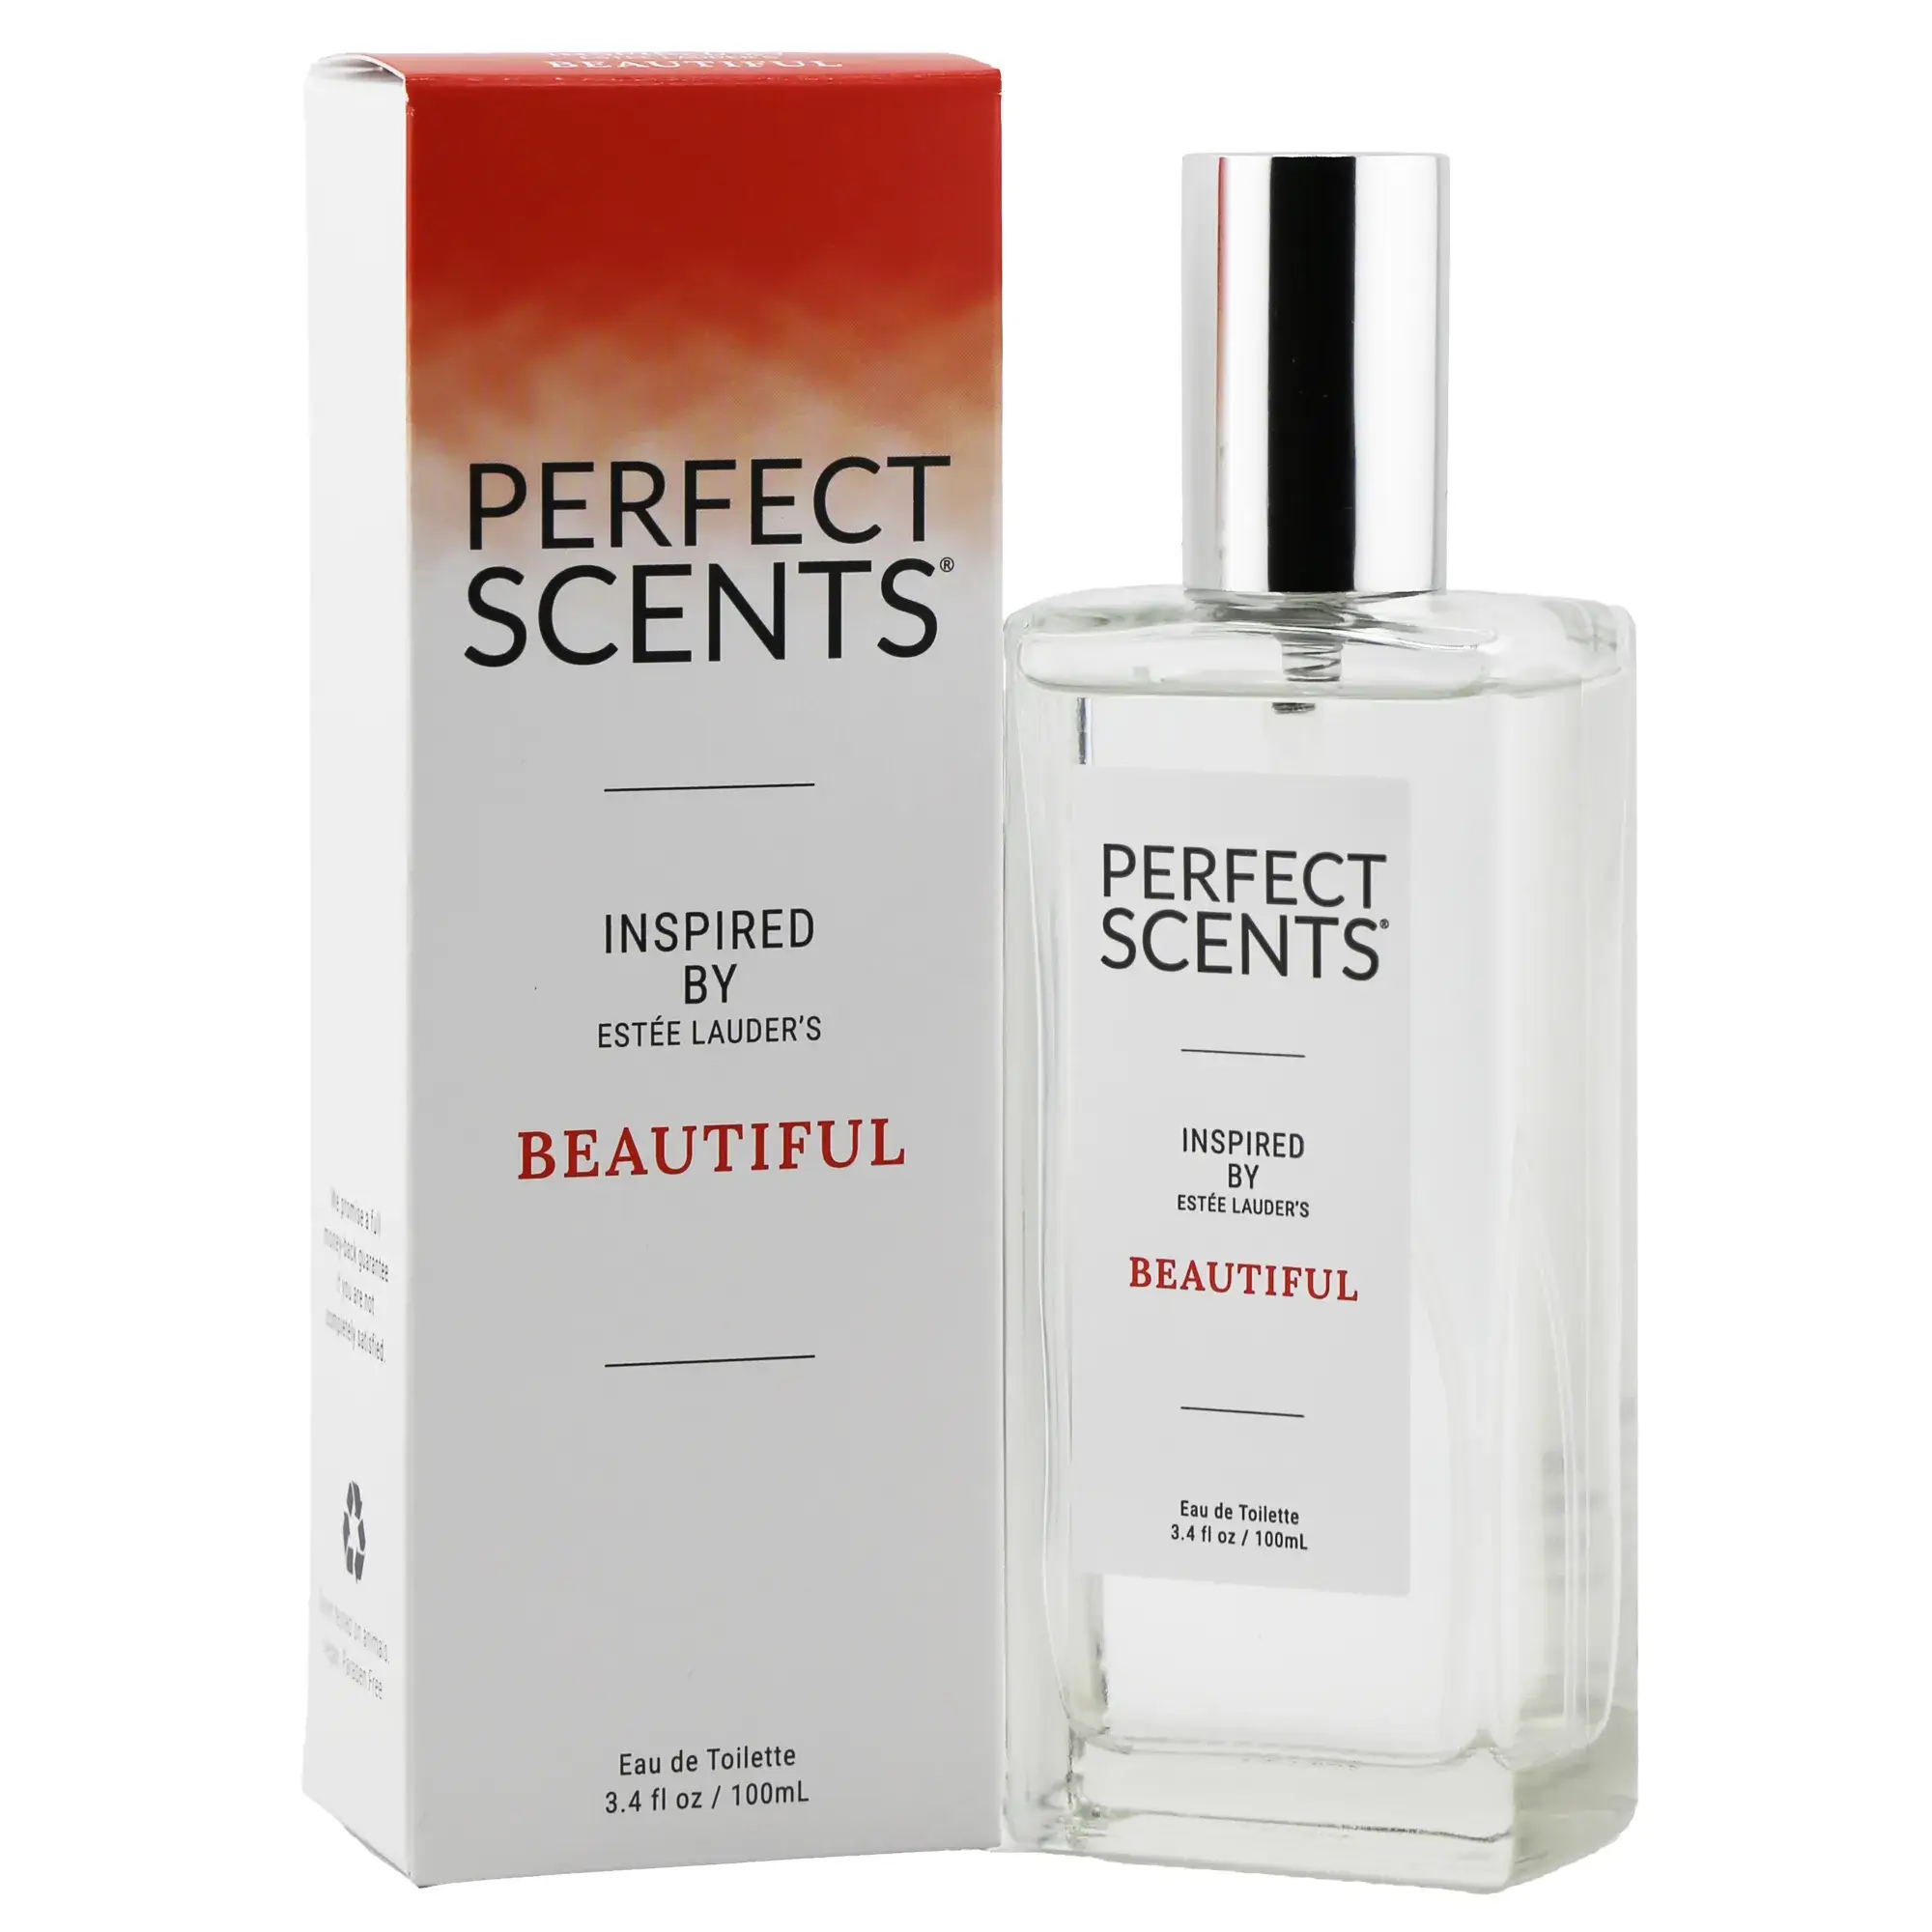 Perfect Scents - Inspired by Estee Lauder's Beautiful - Instyle Fragrances